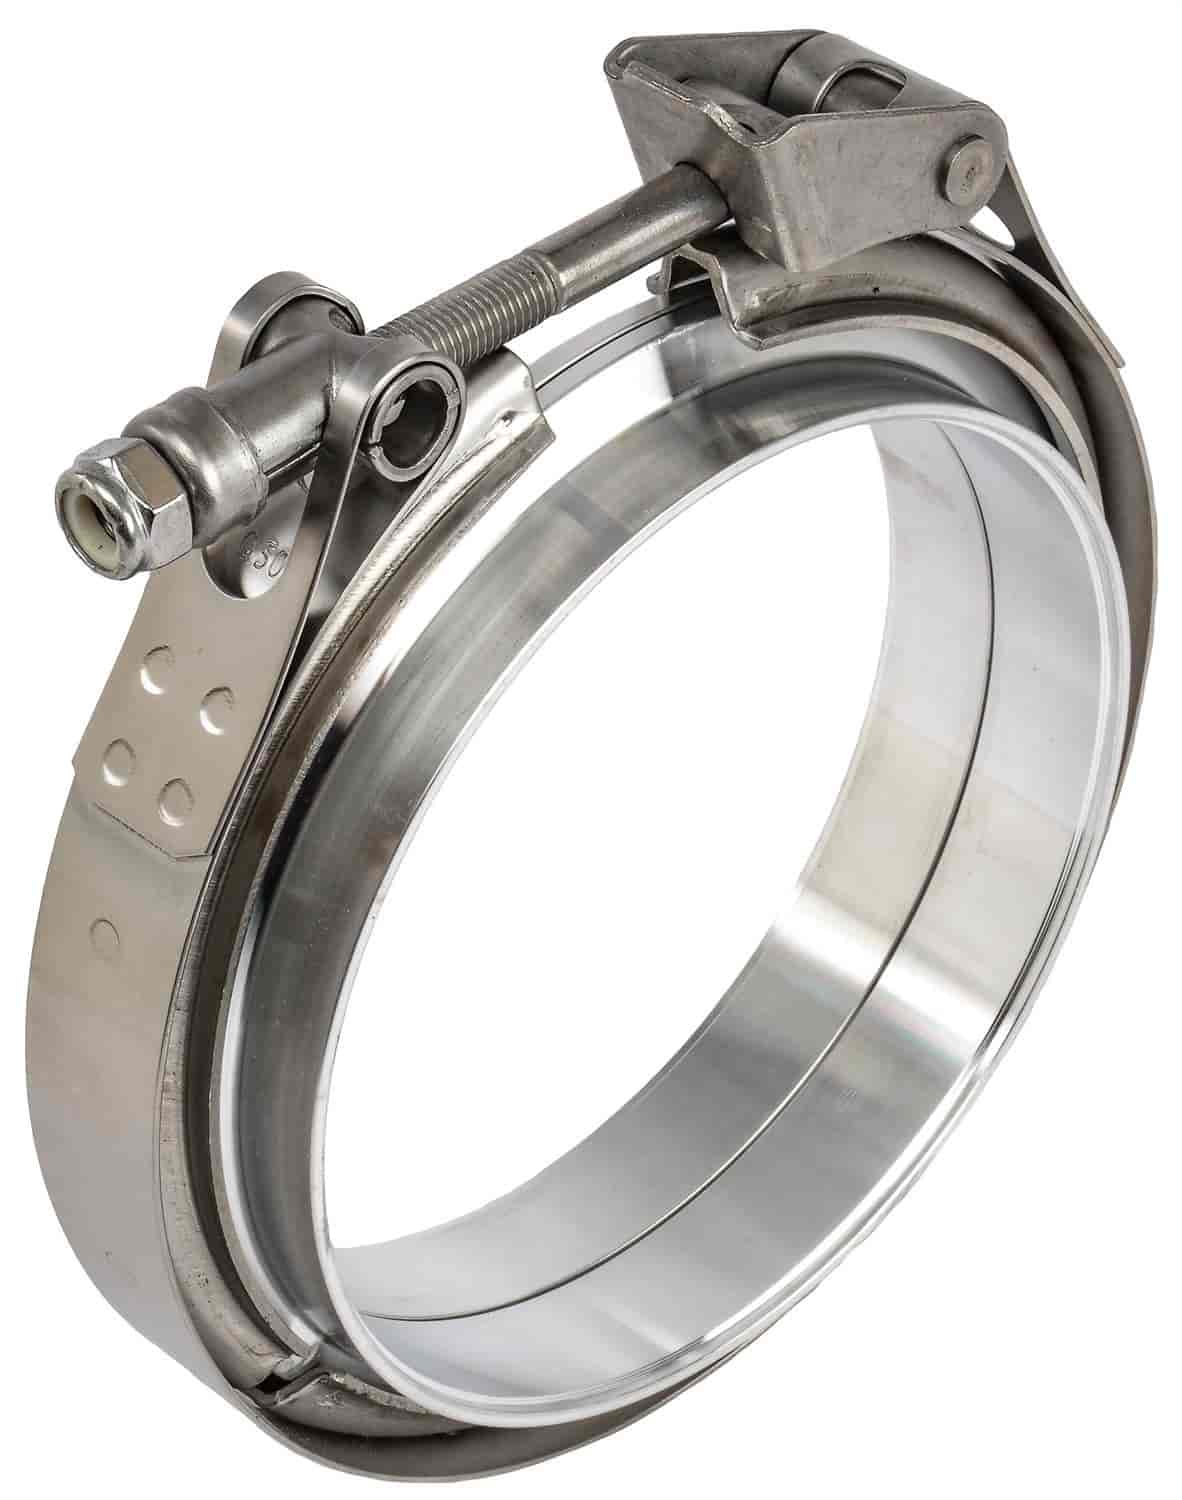 Stainless Steel Quick Release V-Band Clamp & Aluminum Flanges 5 in.